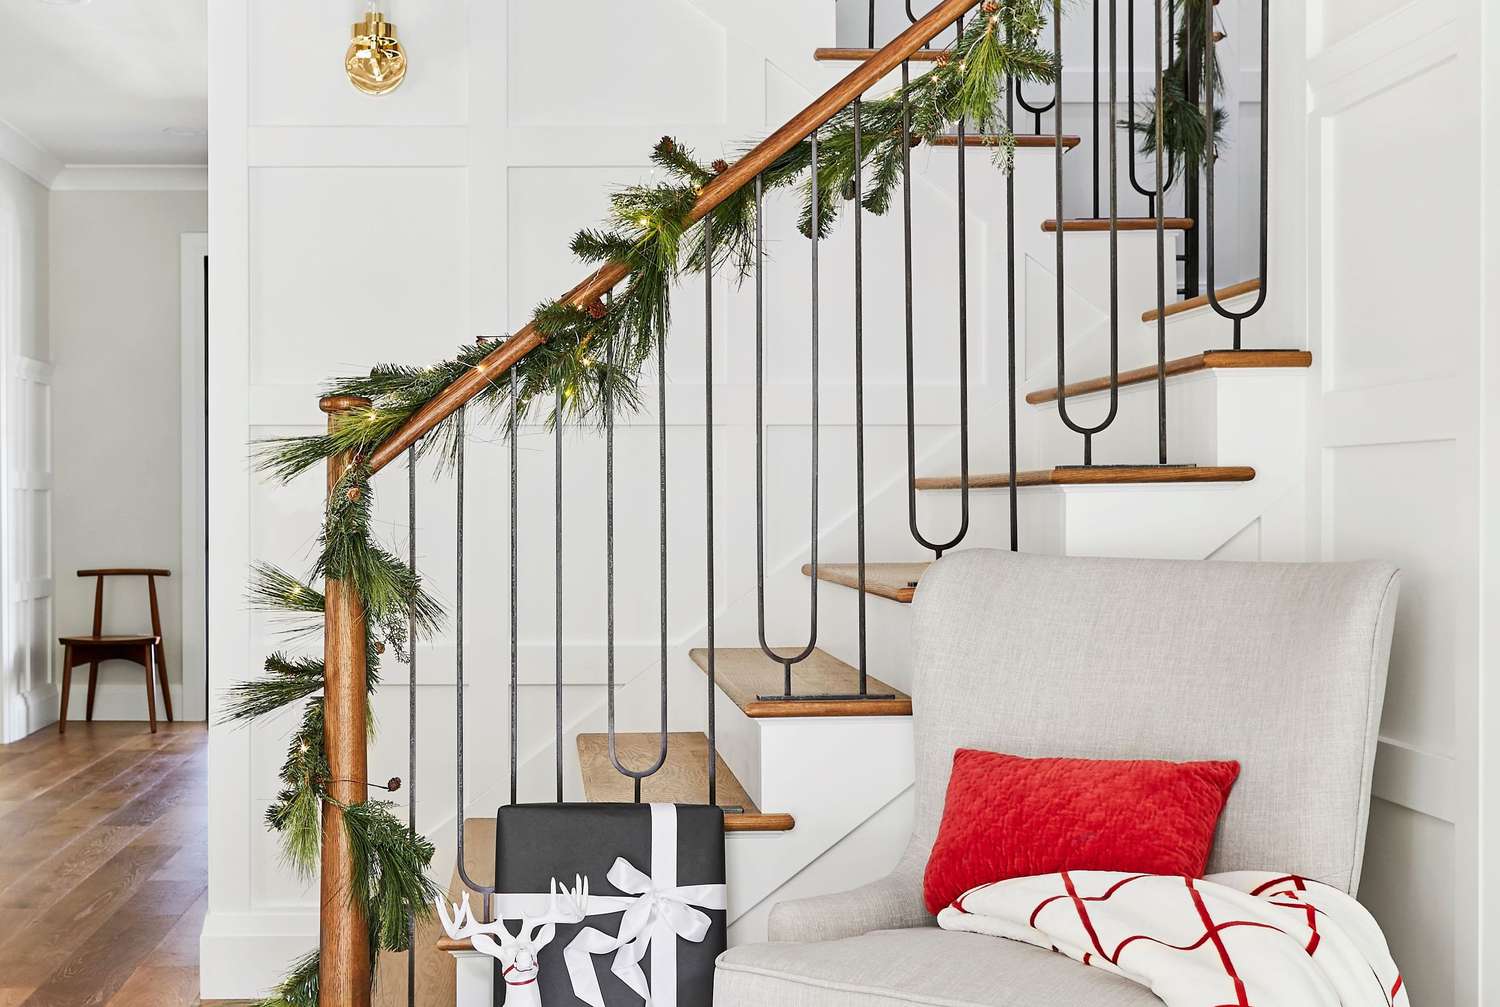 Unique Christmas Entryway Decor Ideas to Bring in the Holiday Cheer